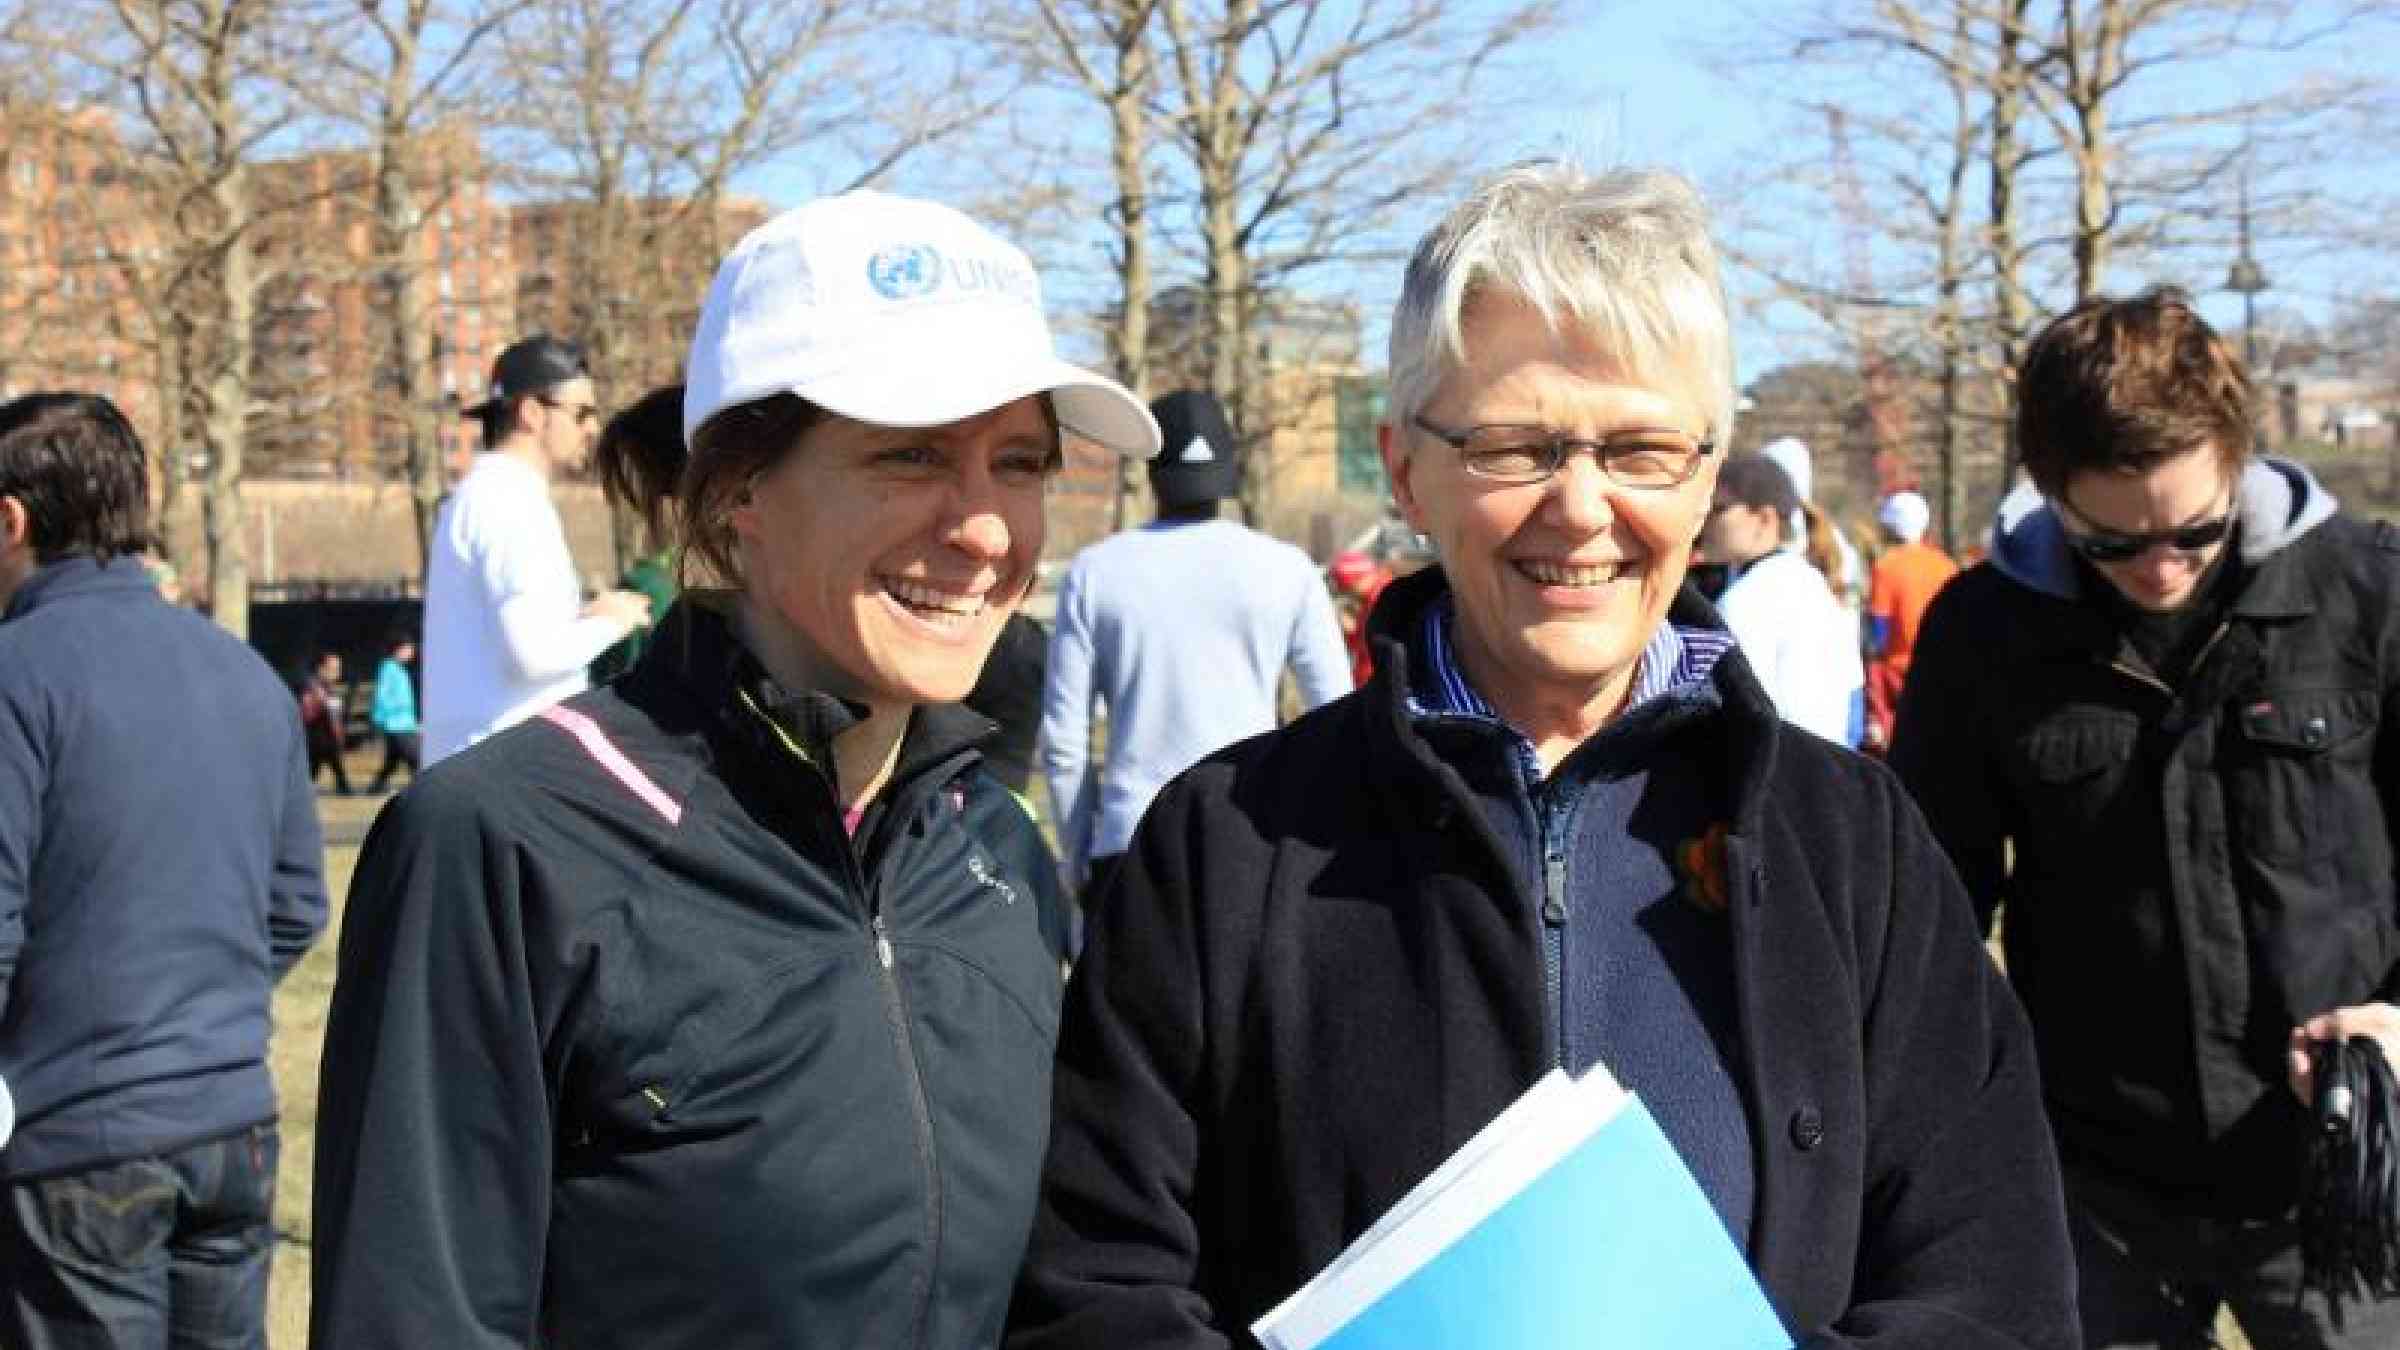 Mayor Dawn Zimmer of Hoboken, NJ and Margareta Wahlström. Chief of UNISDR. The City of Hoboken organized the Hoboken Resilience Run, a 5K and Fun Run for post Hurricane Sandy recovery. The run, which took place on 6 April 2013, was organized in support of UNISDR's Making Cities Resilient Campaign